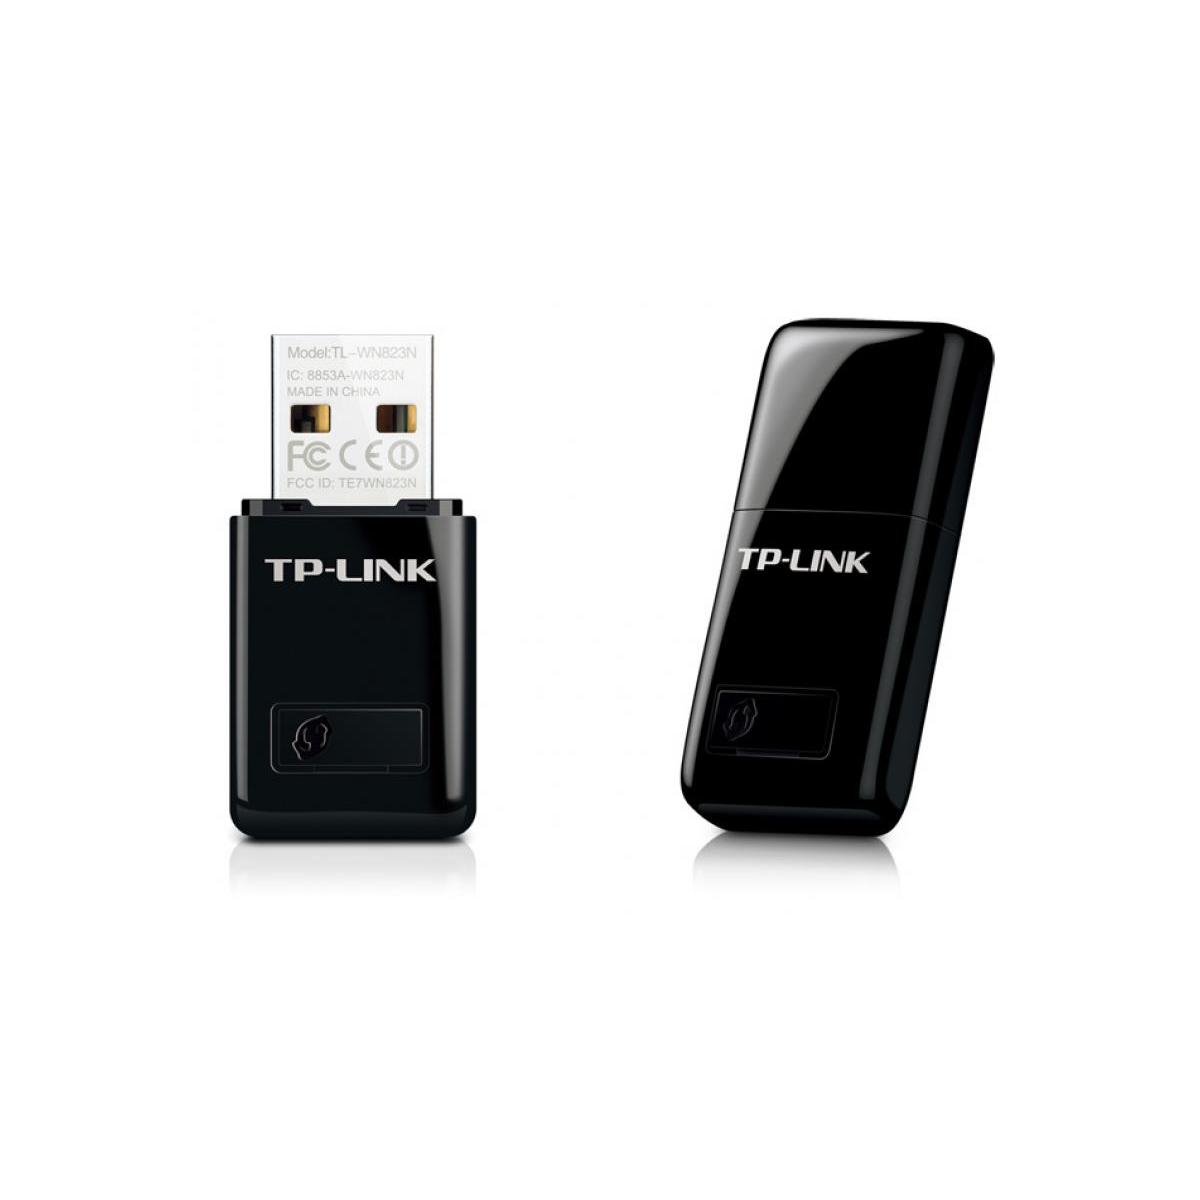 TP-LINK 300M Mini Wireless N USB Adapter | Routers Networking | Smart Tech |